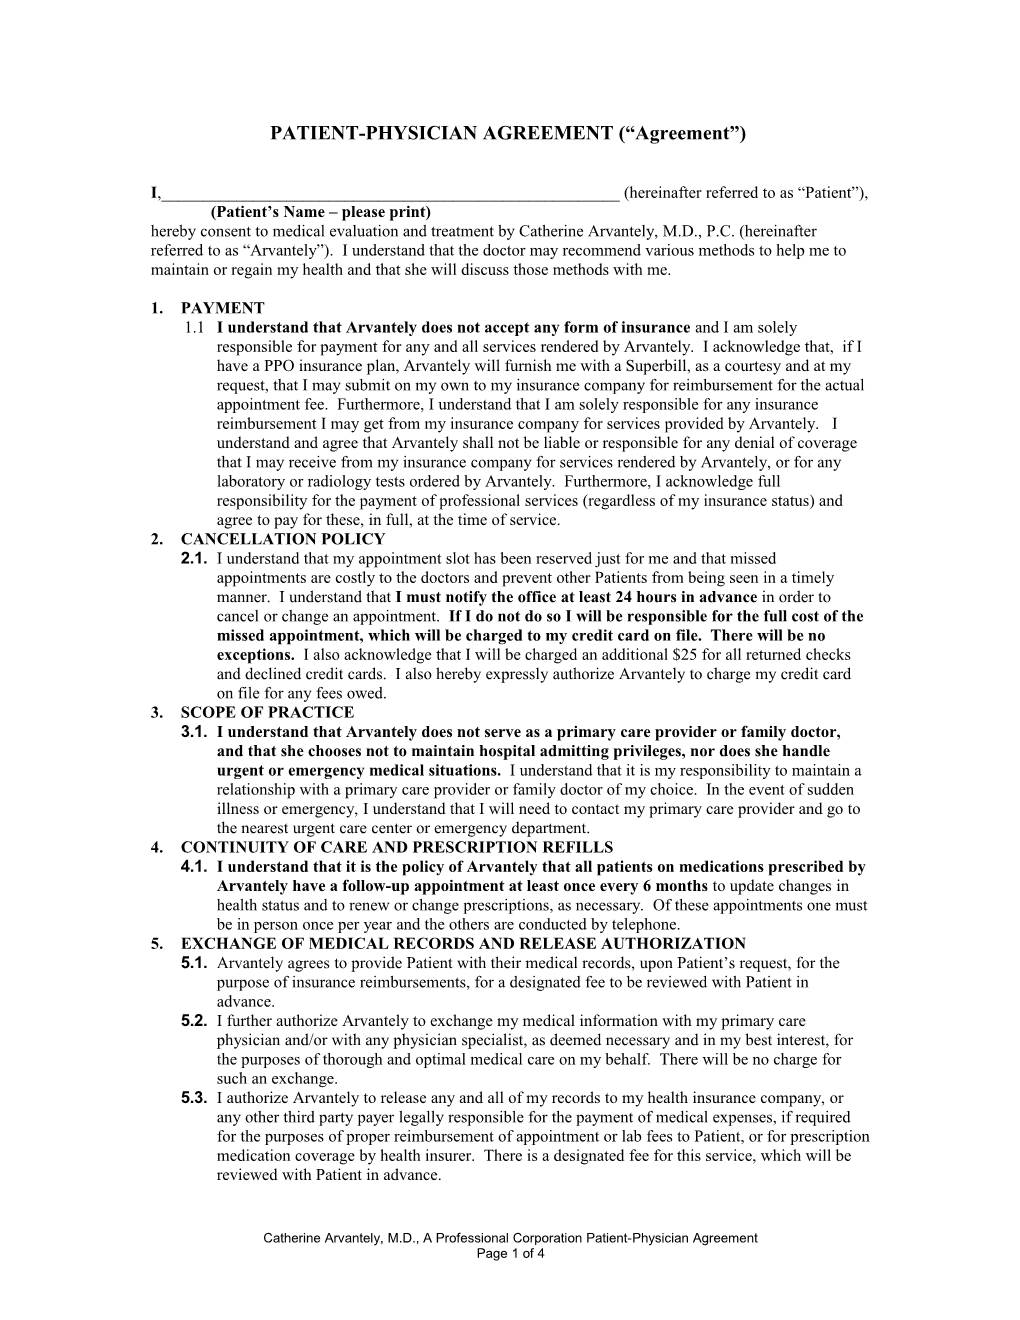 PATIENT-PHYSICIAN AGREEMENT ( Agreement )